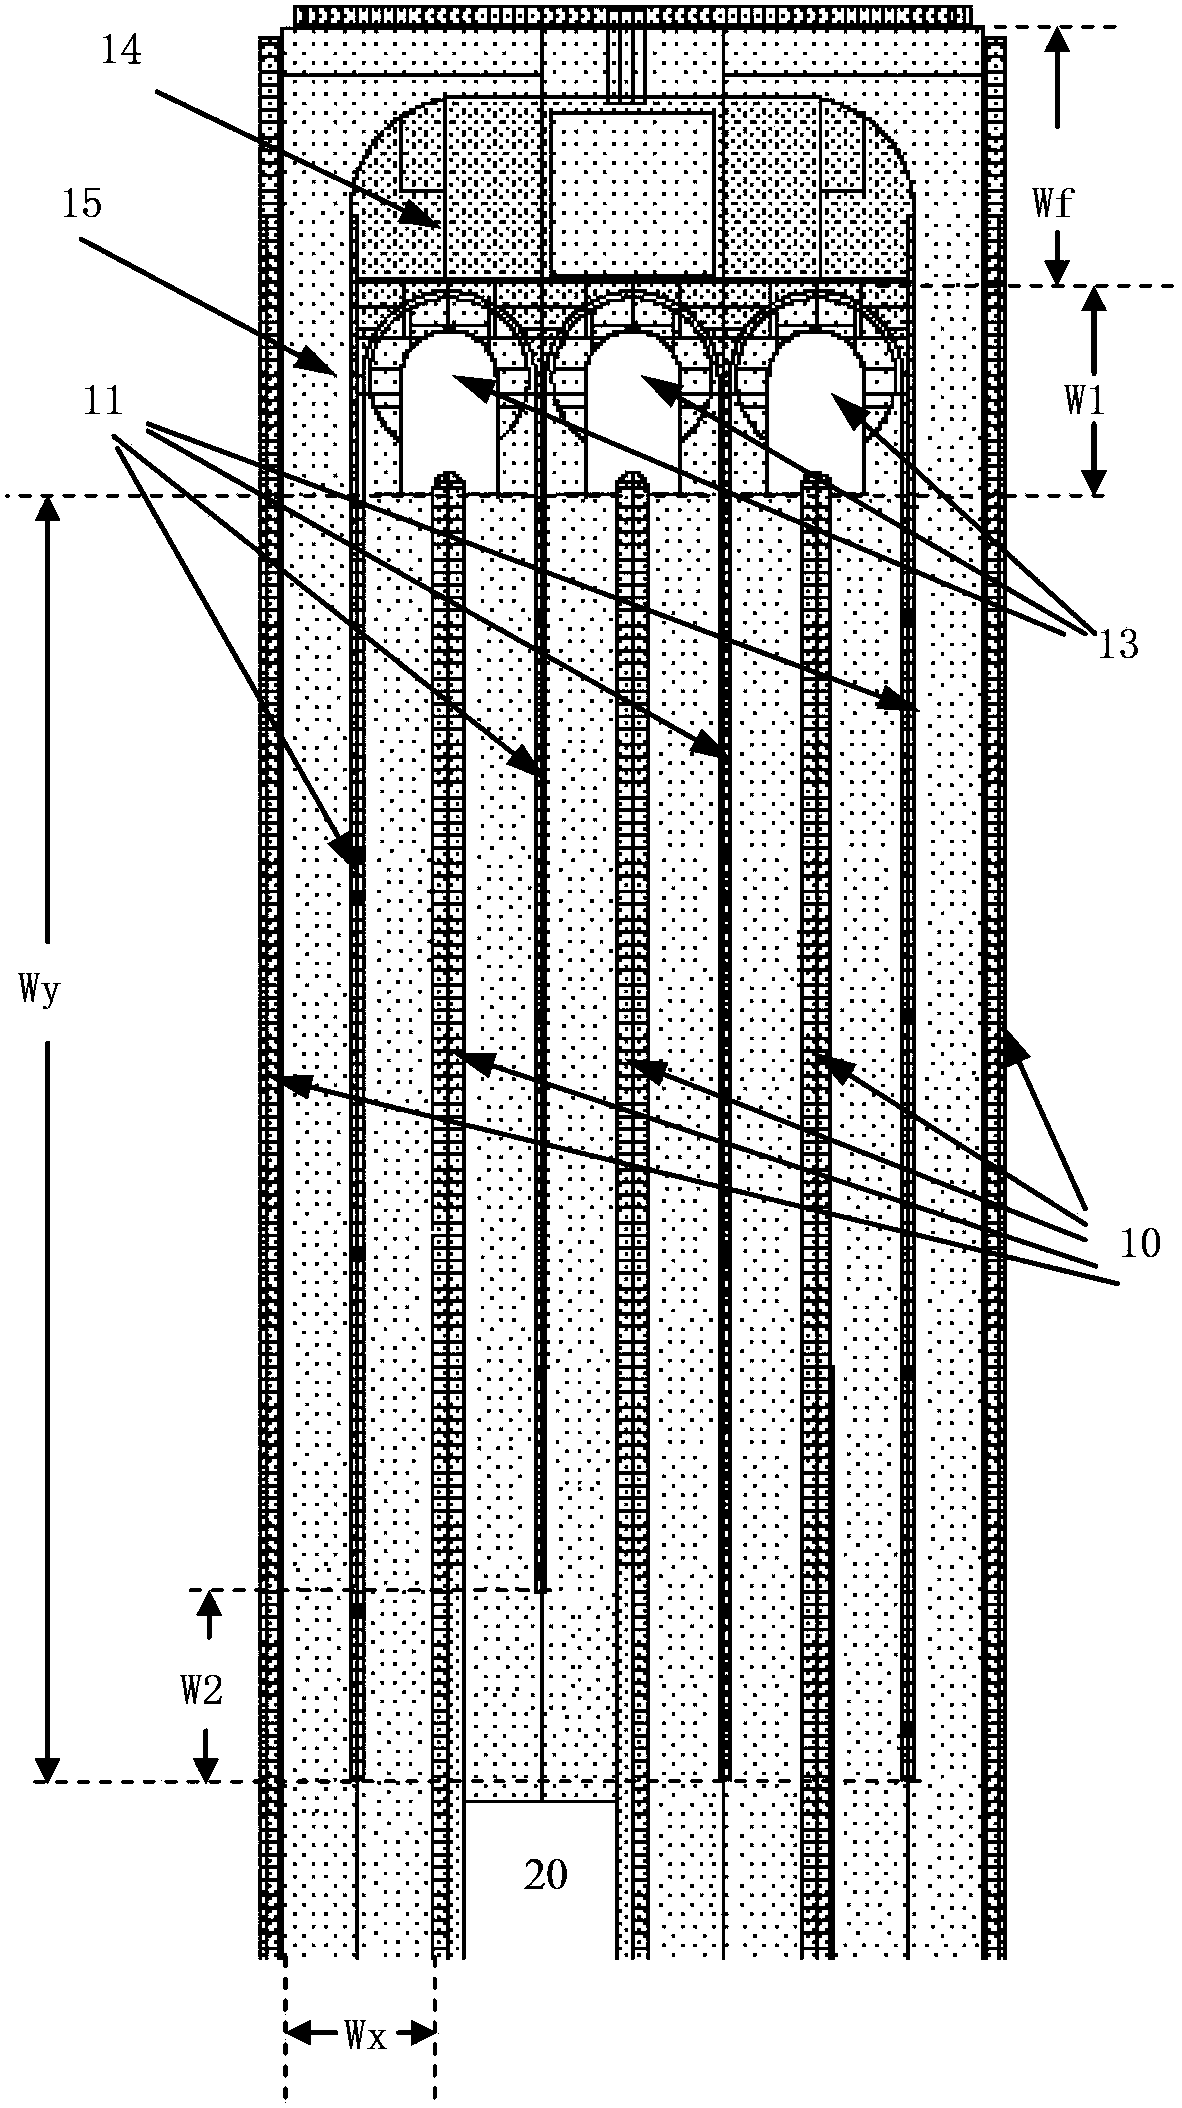 Simulation method of LDMOS (laterally diffused metal oxide semiconductor) array